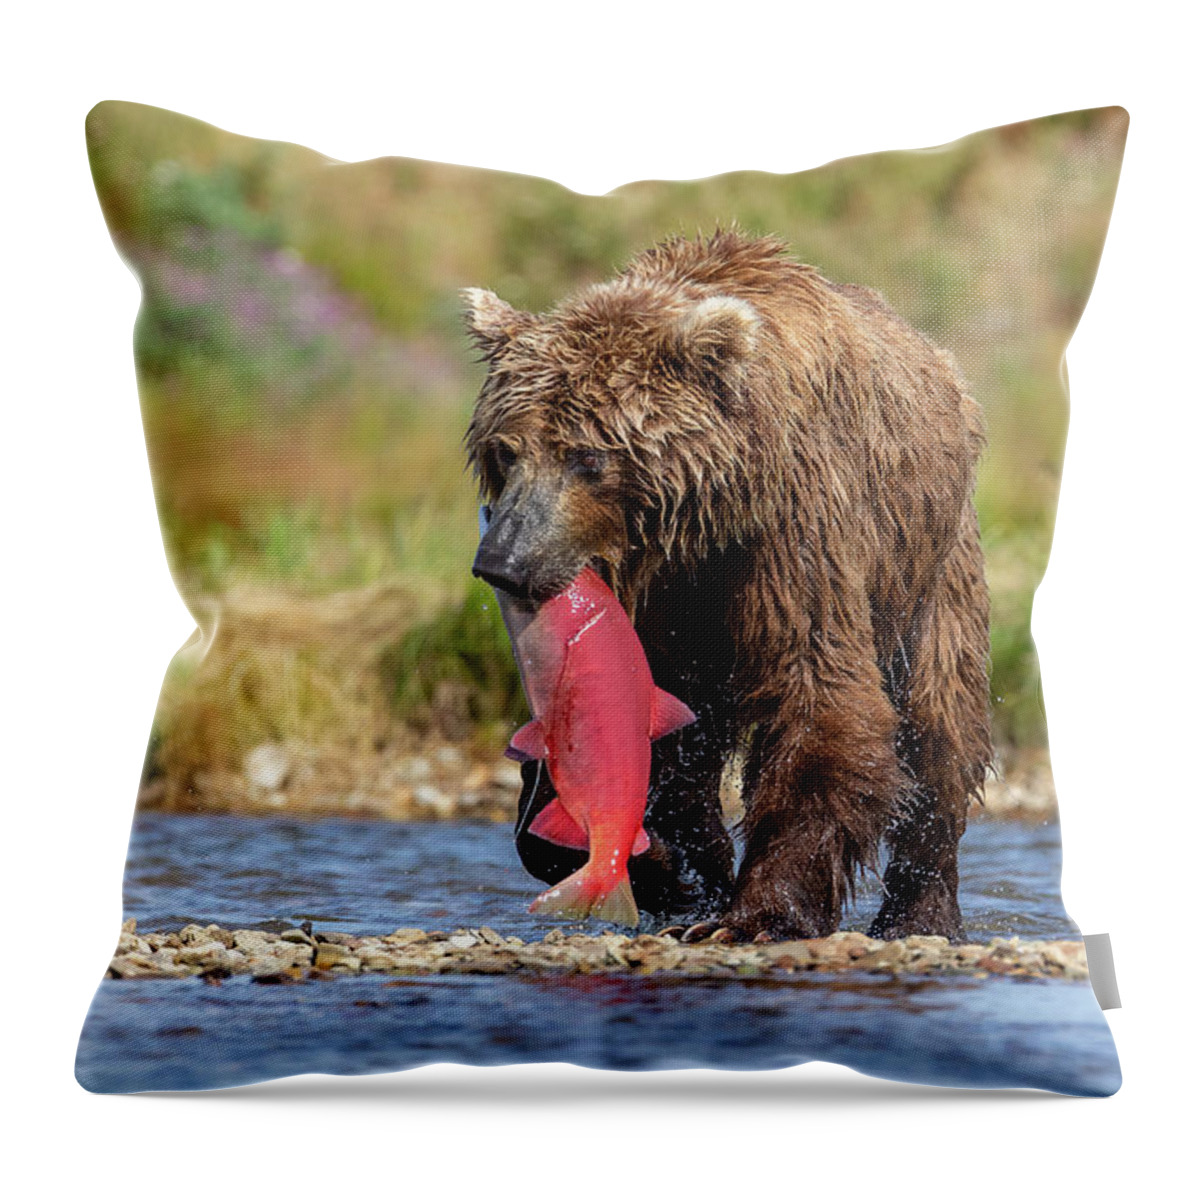 Bear Throw Pillow featuring the photograph Brown Bear Holds Its Meal by Tony Hake